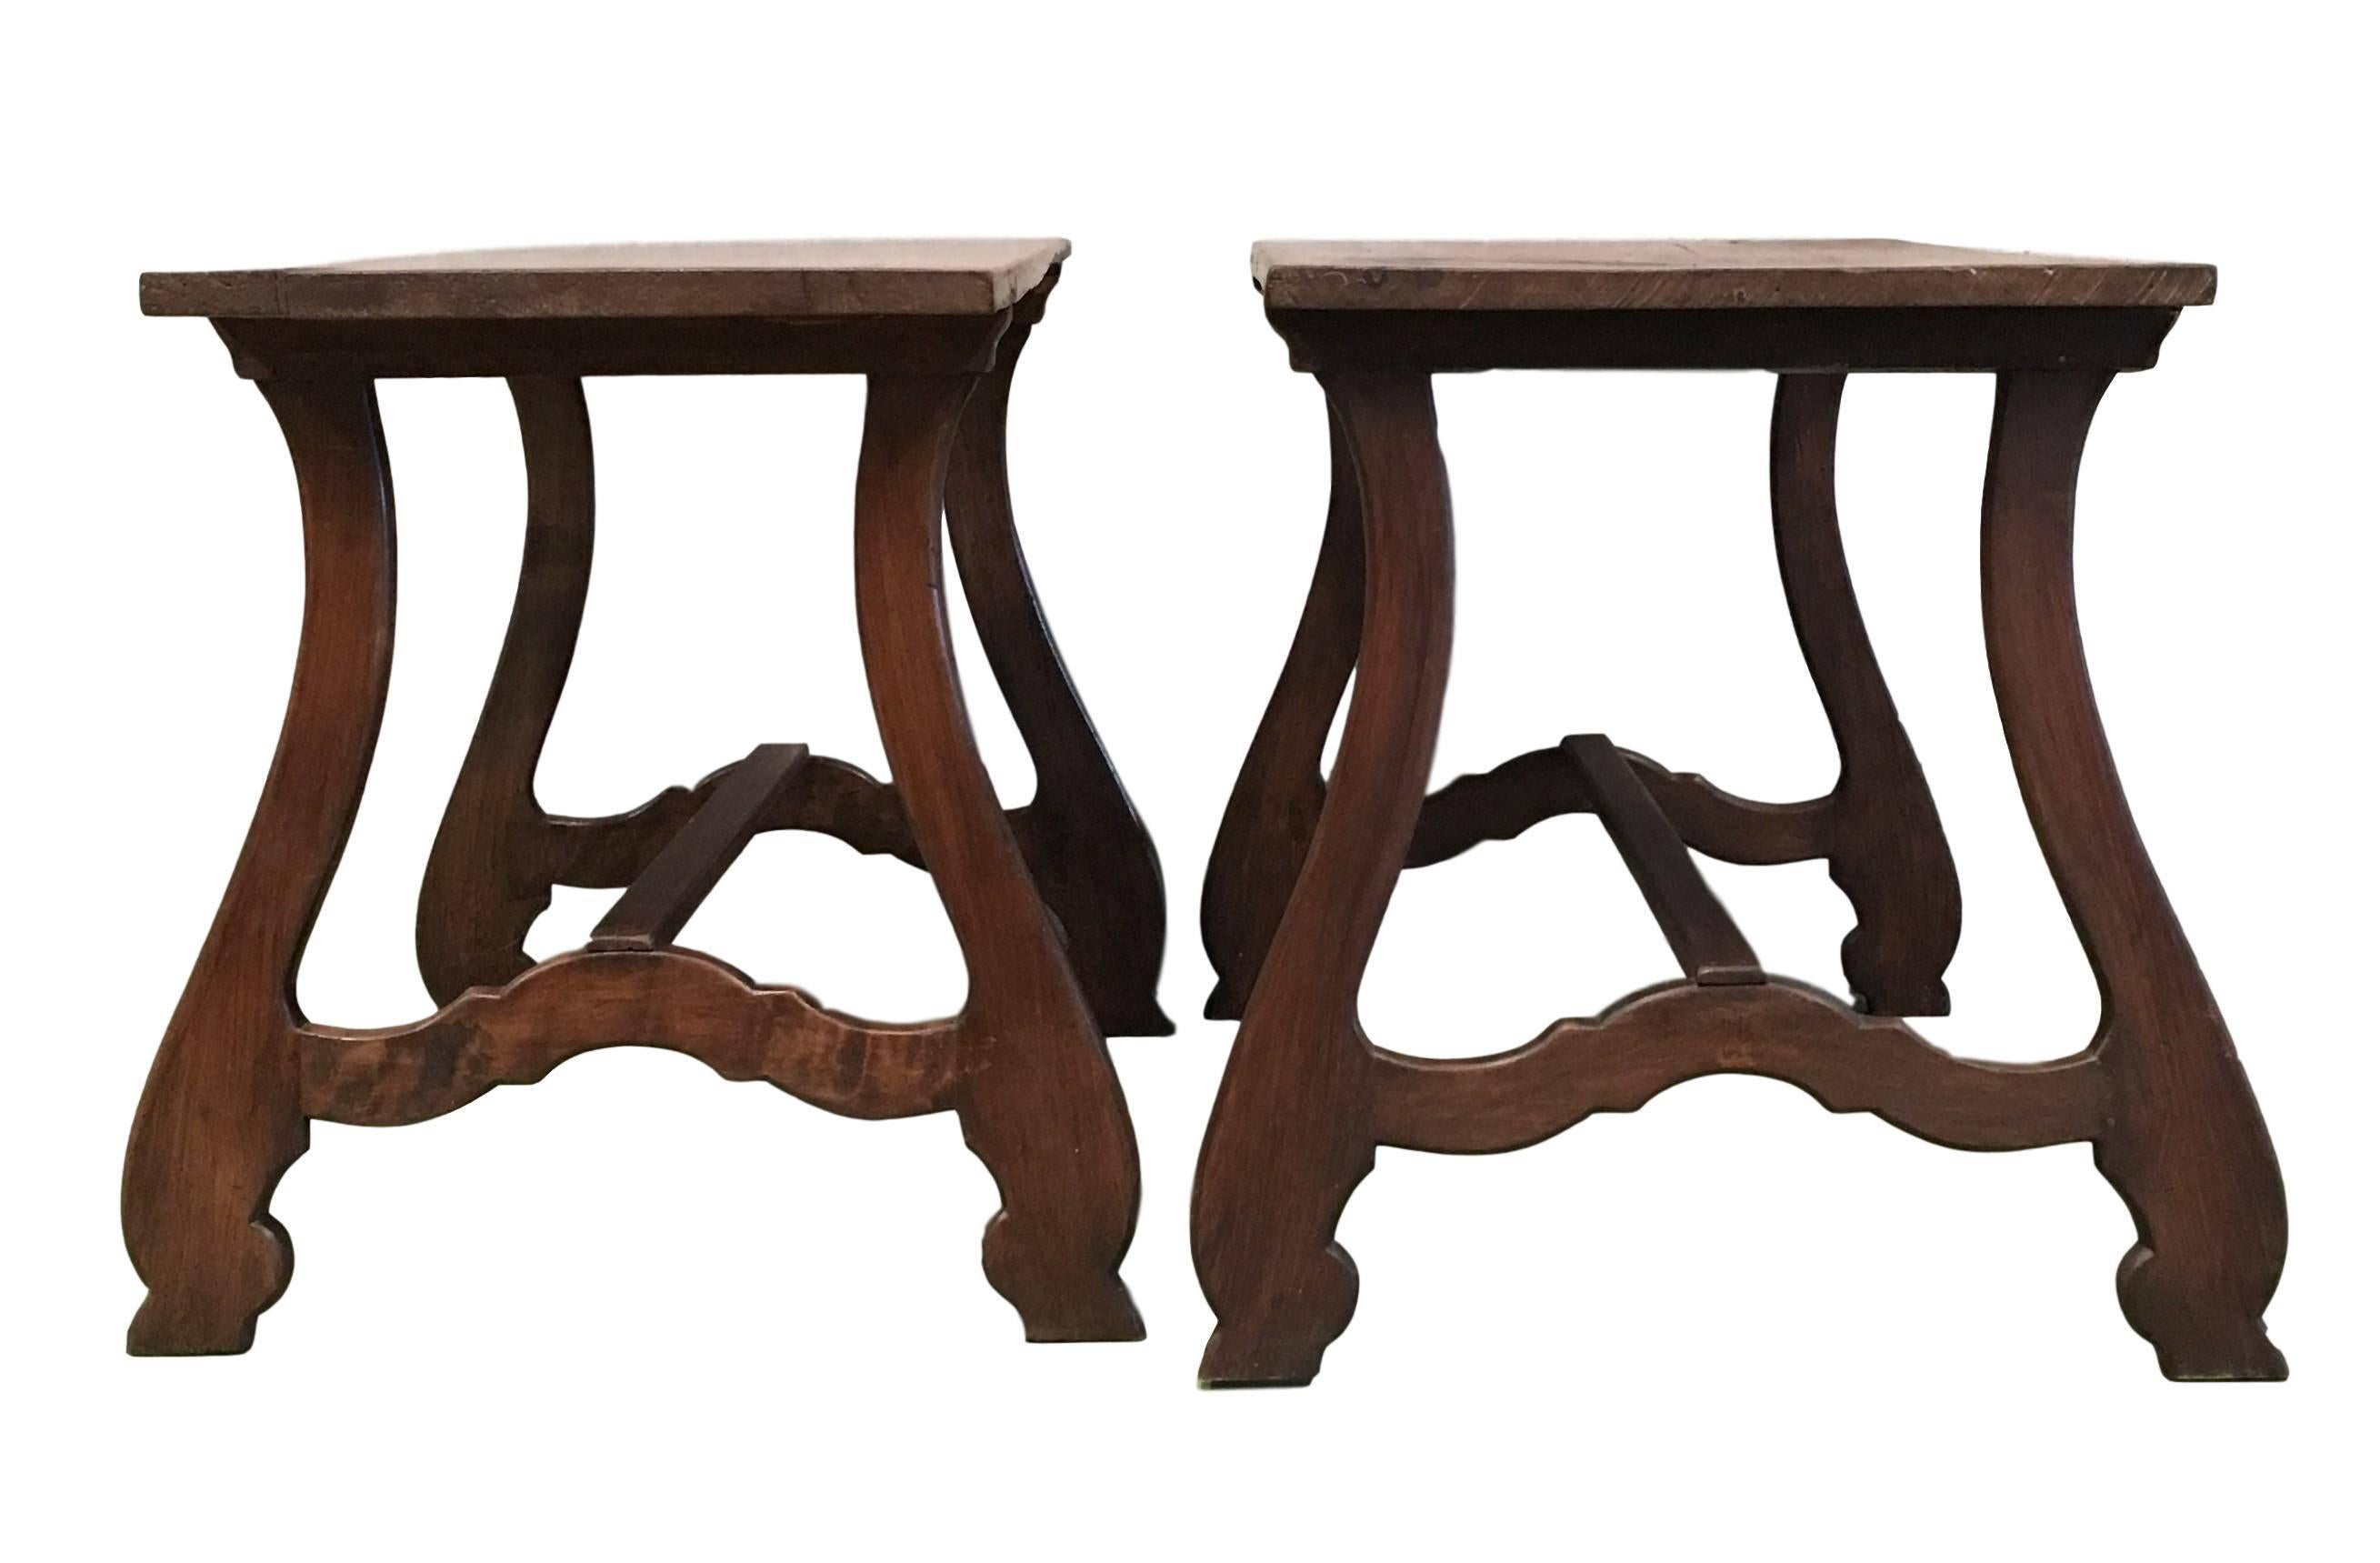 Pair of 20th Spanish farm tables or desk table. Side tables.

Measurements:
Table 1 : 37.20in X 21in Height : 29.52in
Table 2 : 38.38in X 23.62in Height : 28.74in